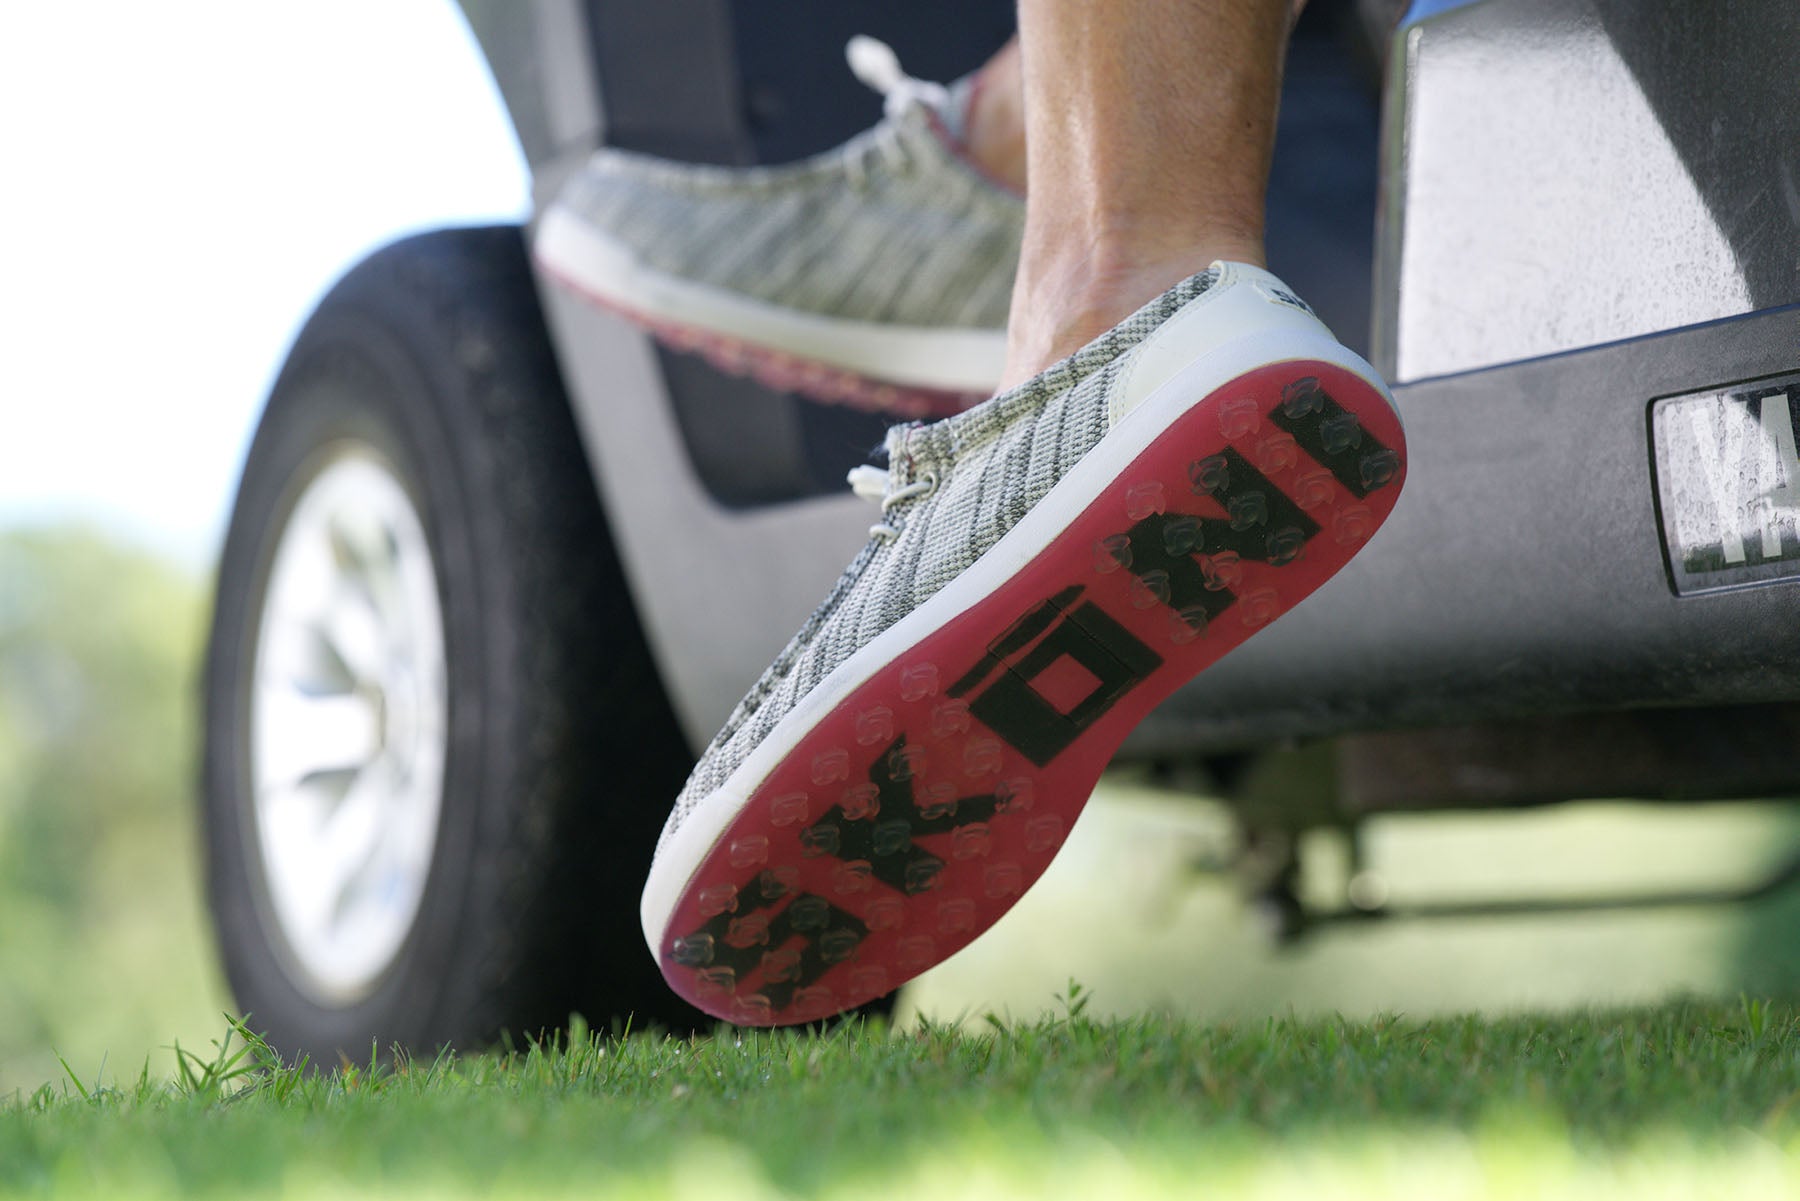 Colorful and comfortable SKŌNI golf shoes worn on a golf cart